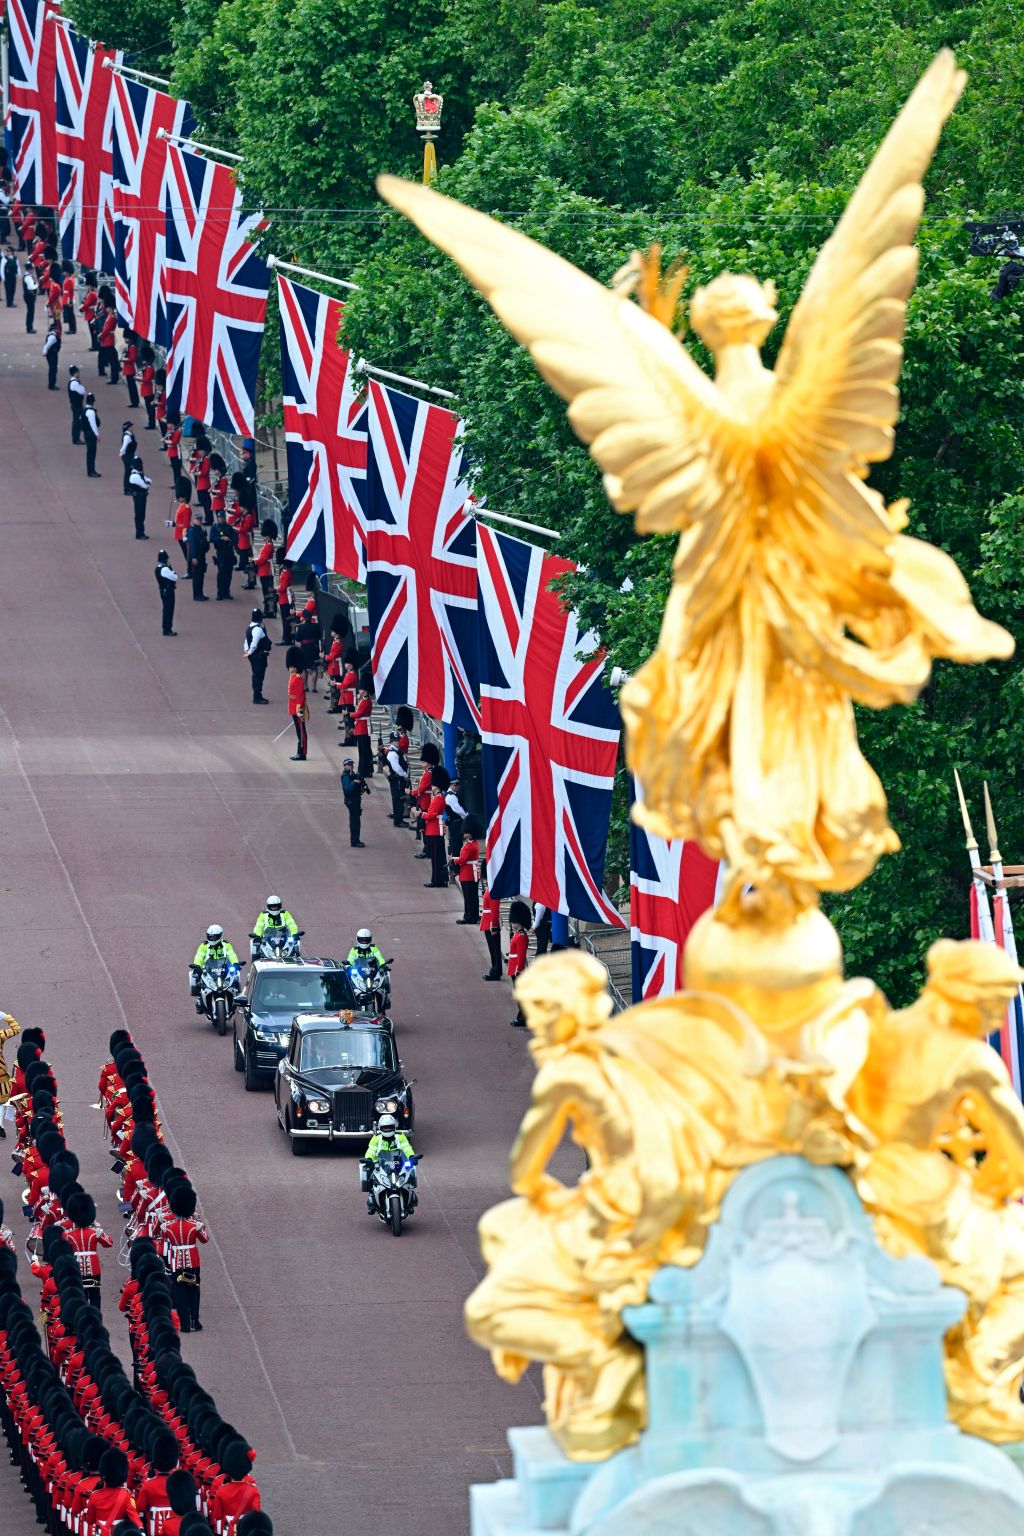 Photos: Queen Elizabeth's Platinum Jubilee kicks off with Trooping the Color